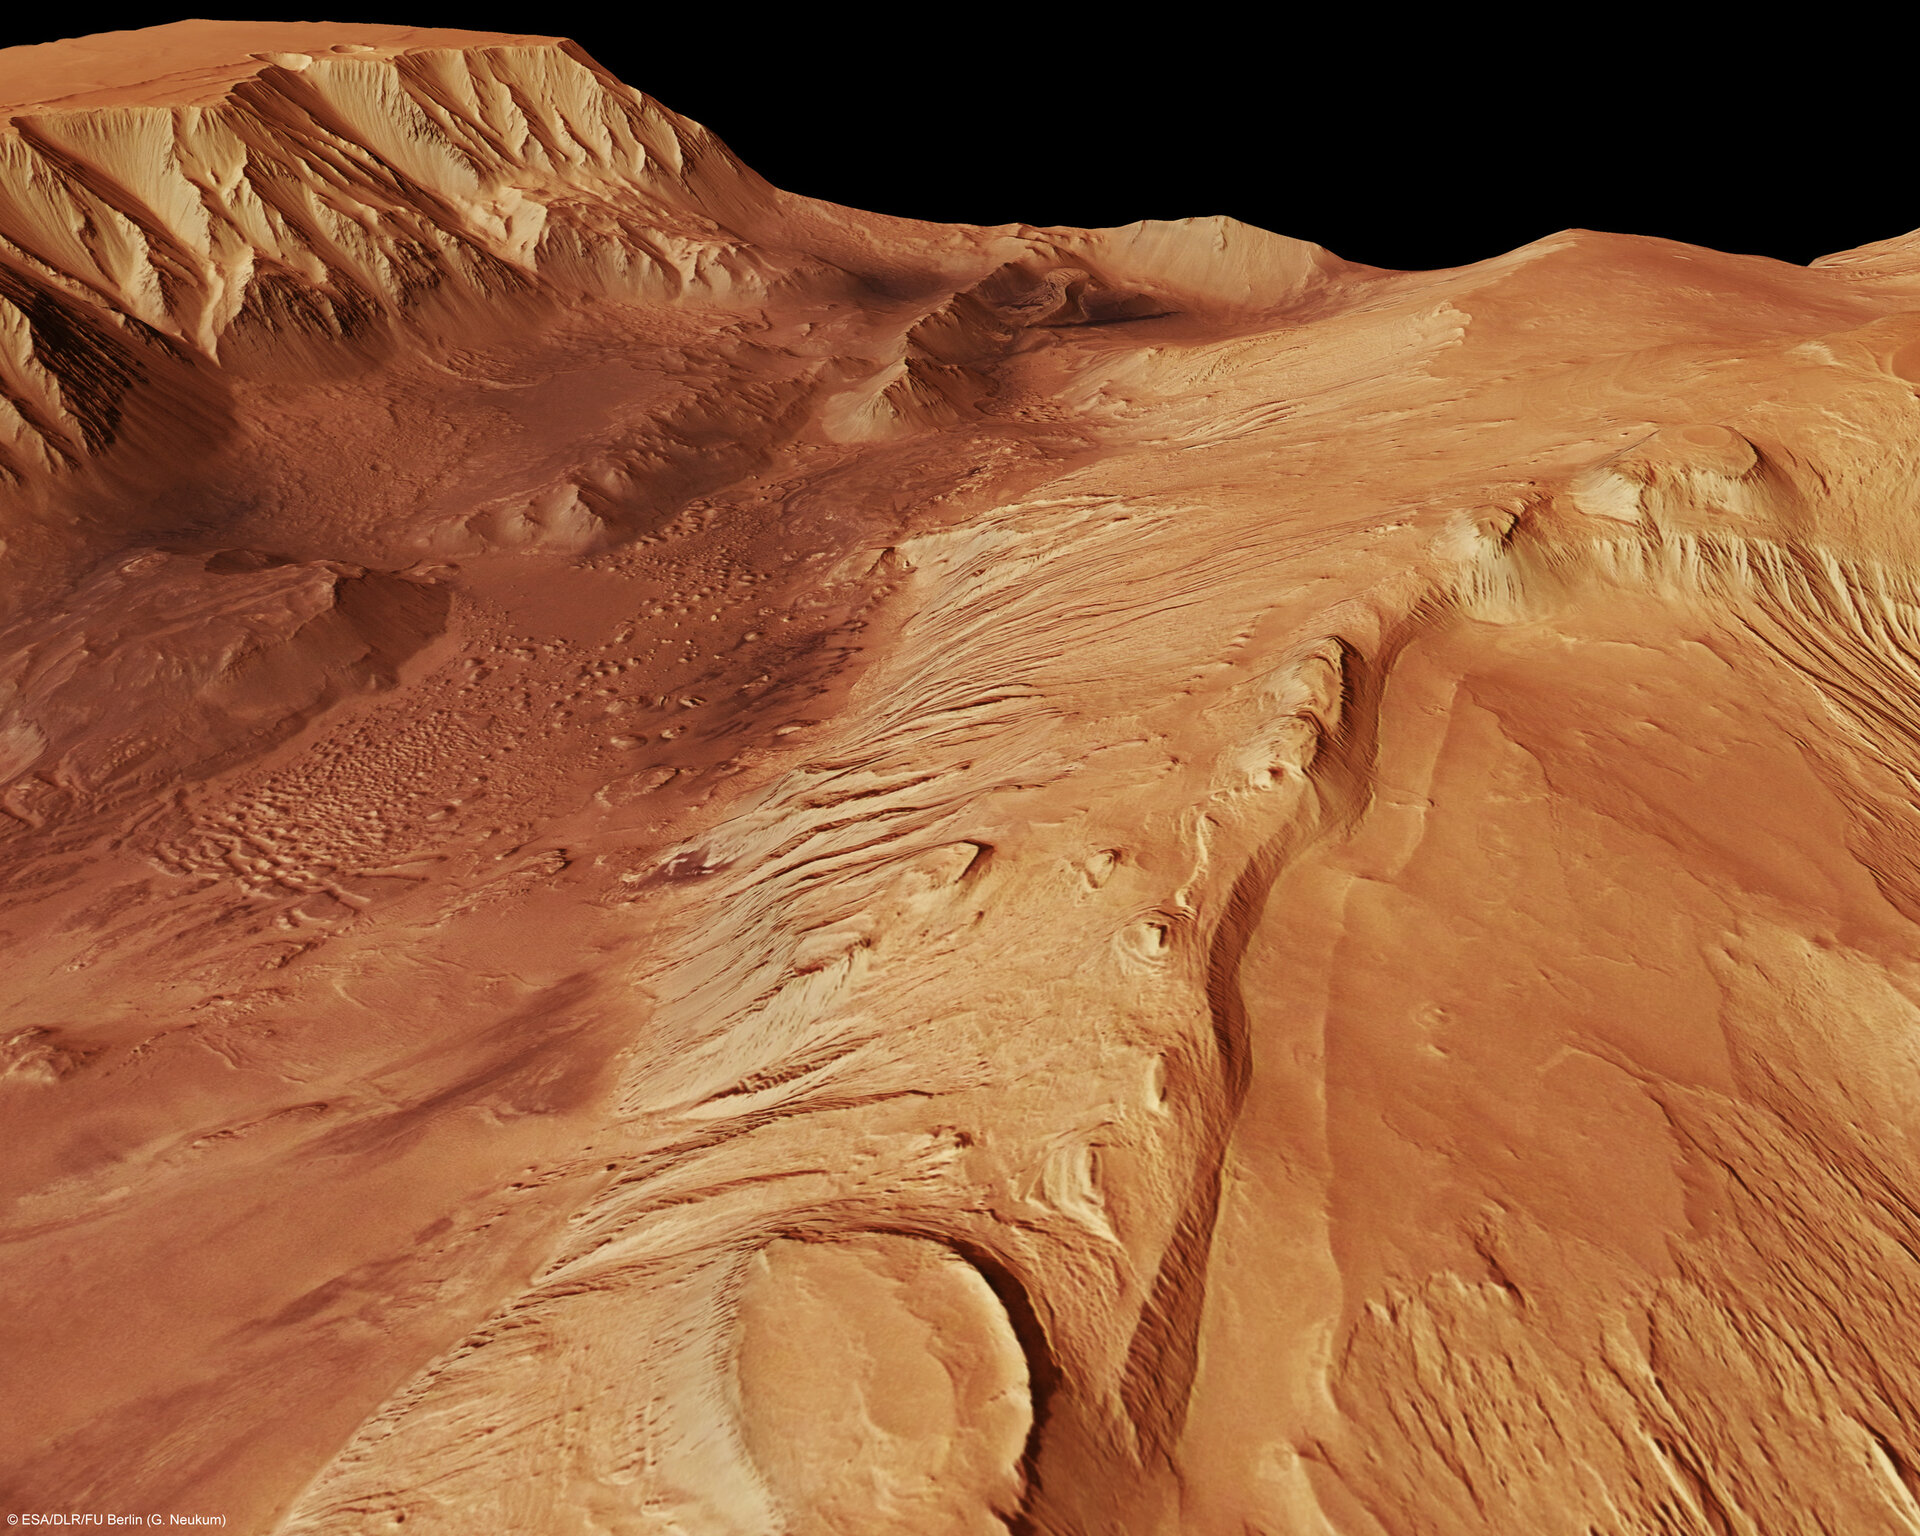 Perspective image of the Valles Marineris canyon, made by the European mission "Mars Express". Credit: ESA / DLR / FU Berlin (G. Neukum), CC BY-SA 3.0 IGO